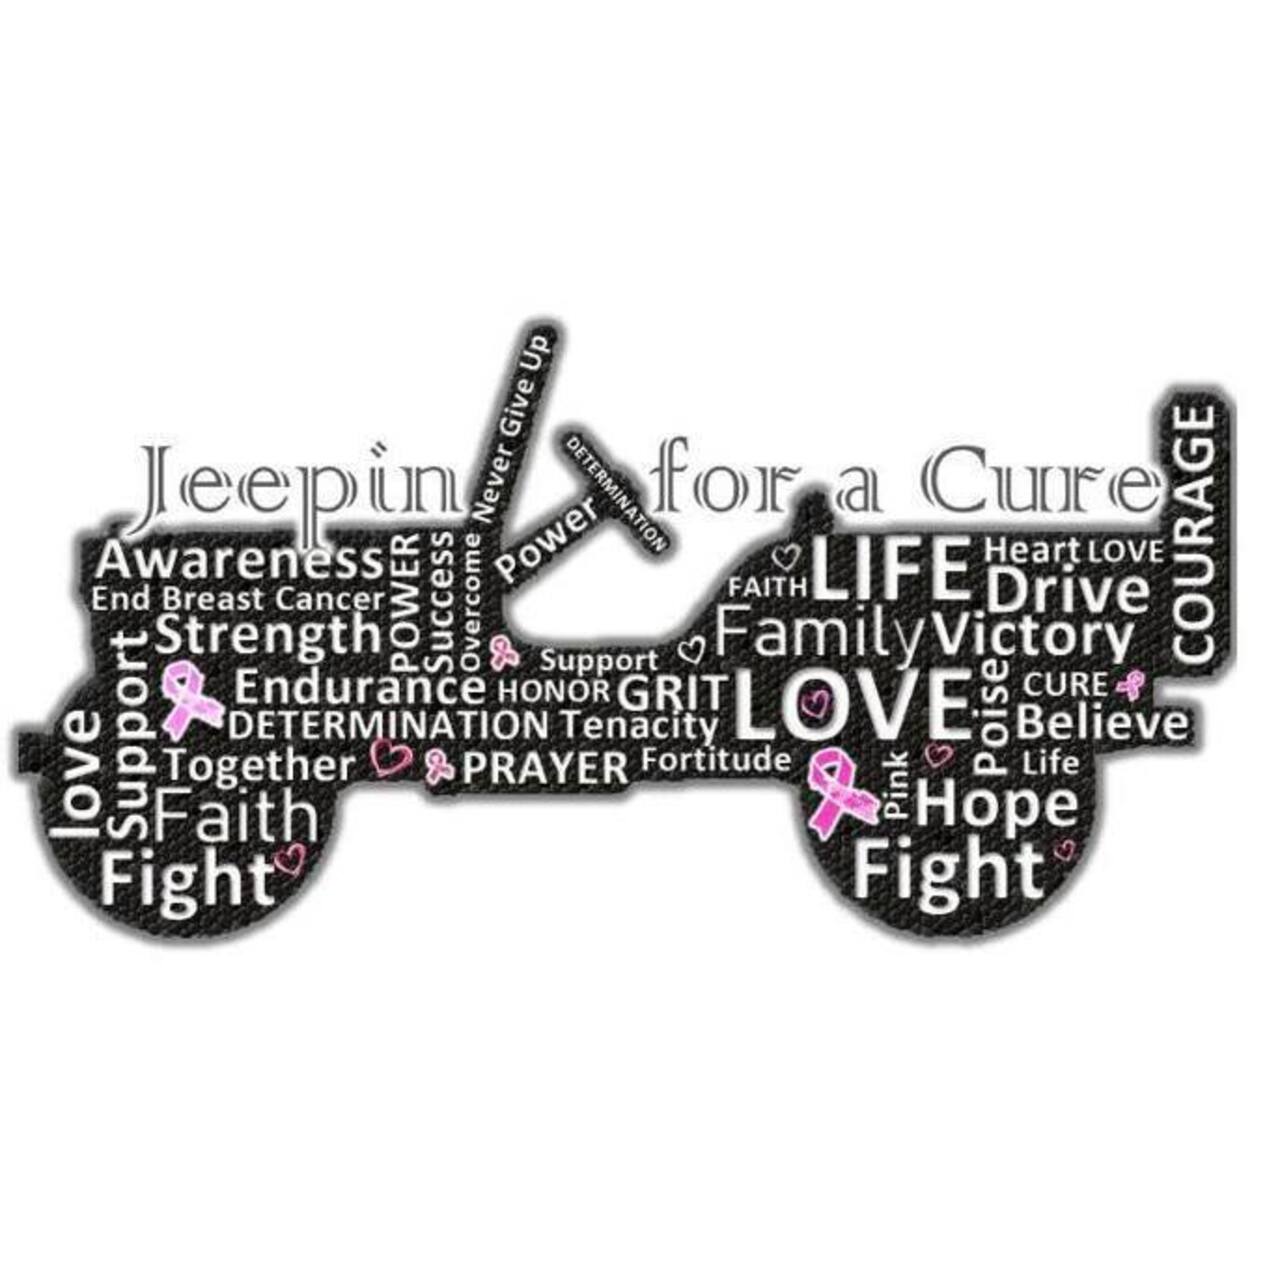 jeeping for a cure